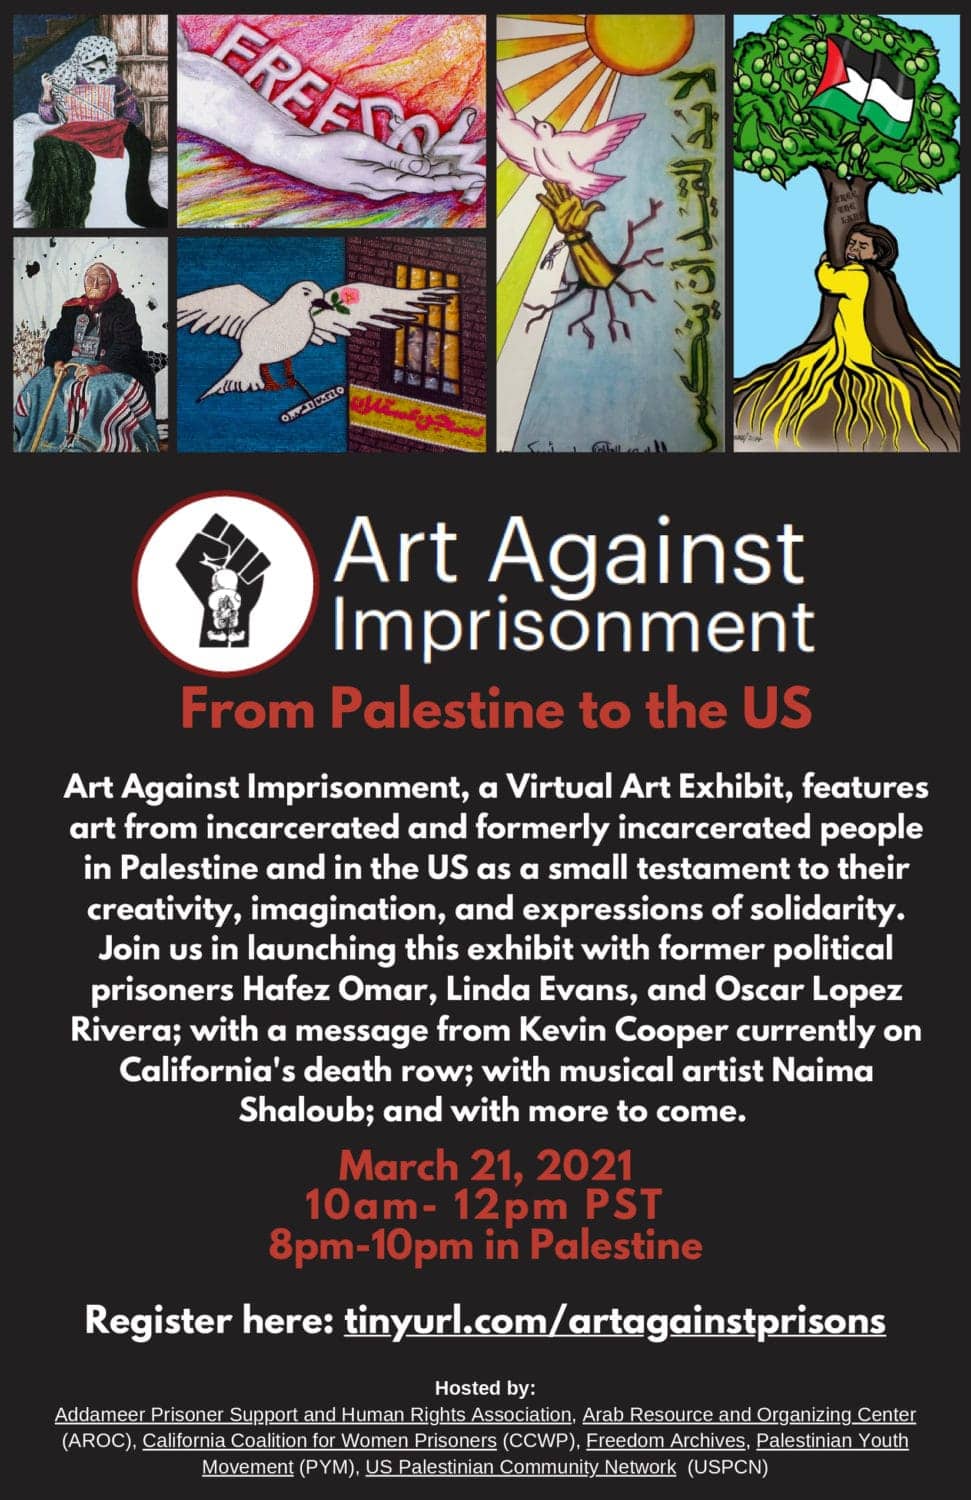 Palestine-Art-Against-Imprisonment-virtual-exhibit-032121, Statement for our Palestinian sisters and brothers!, Abolition Now! 